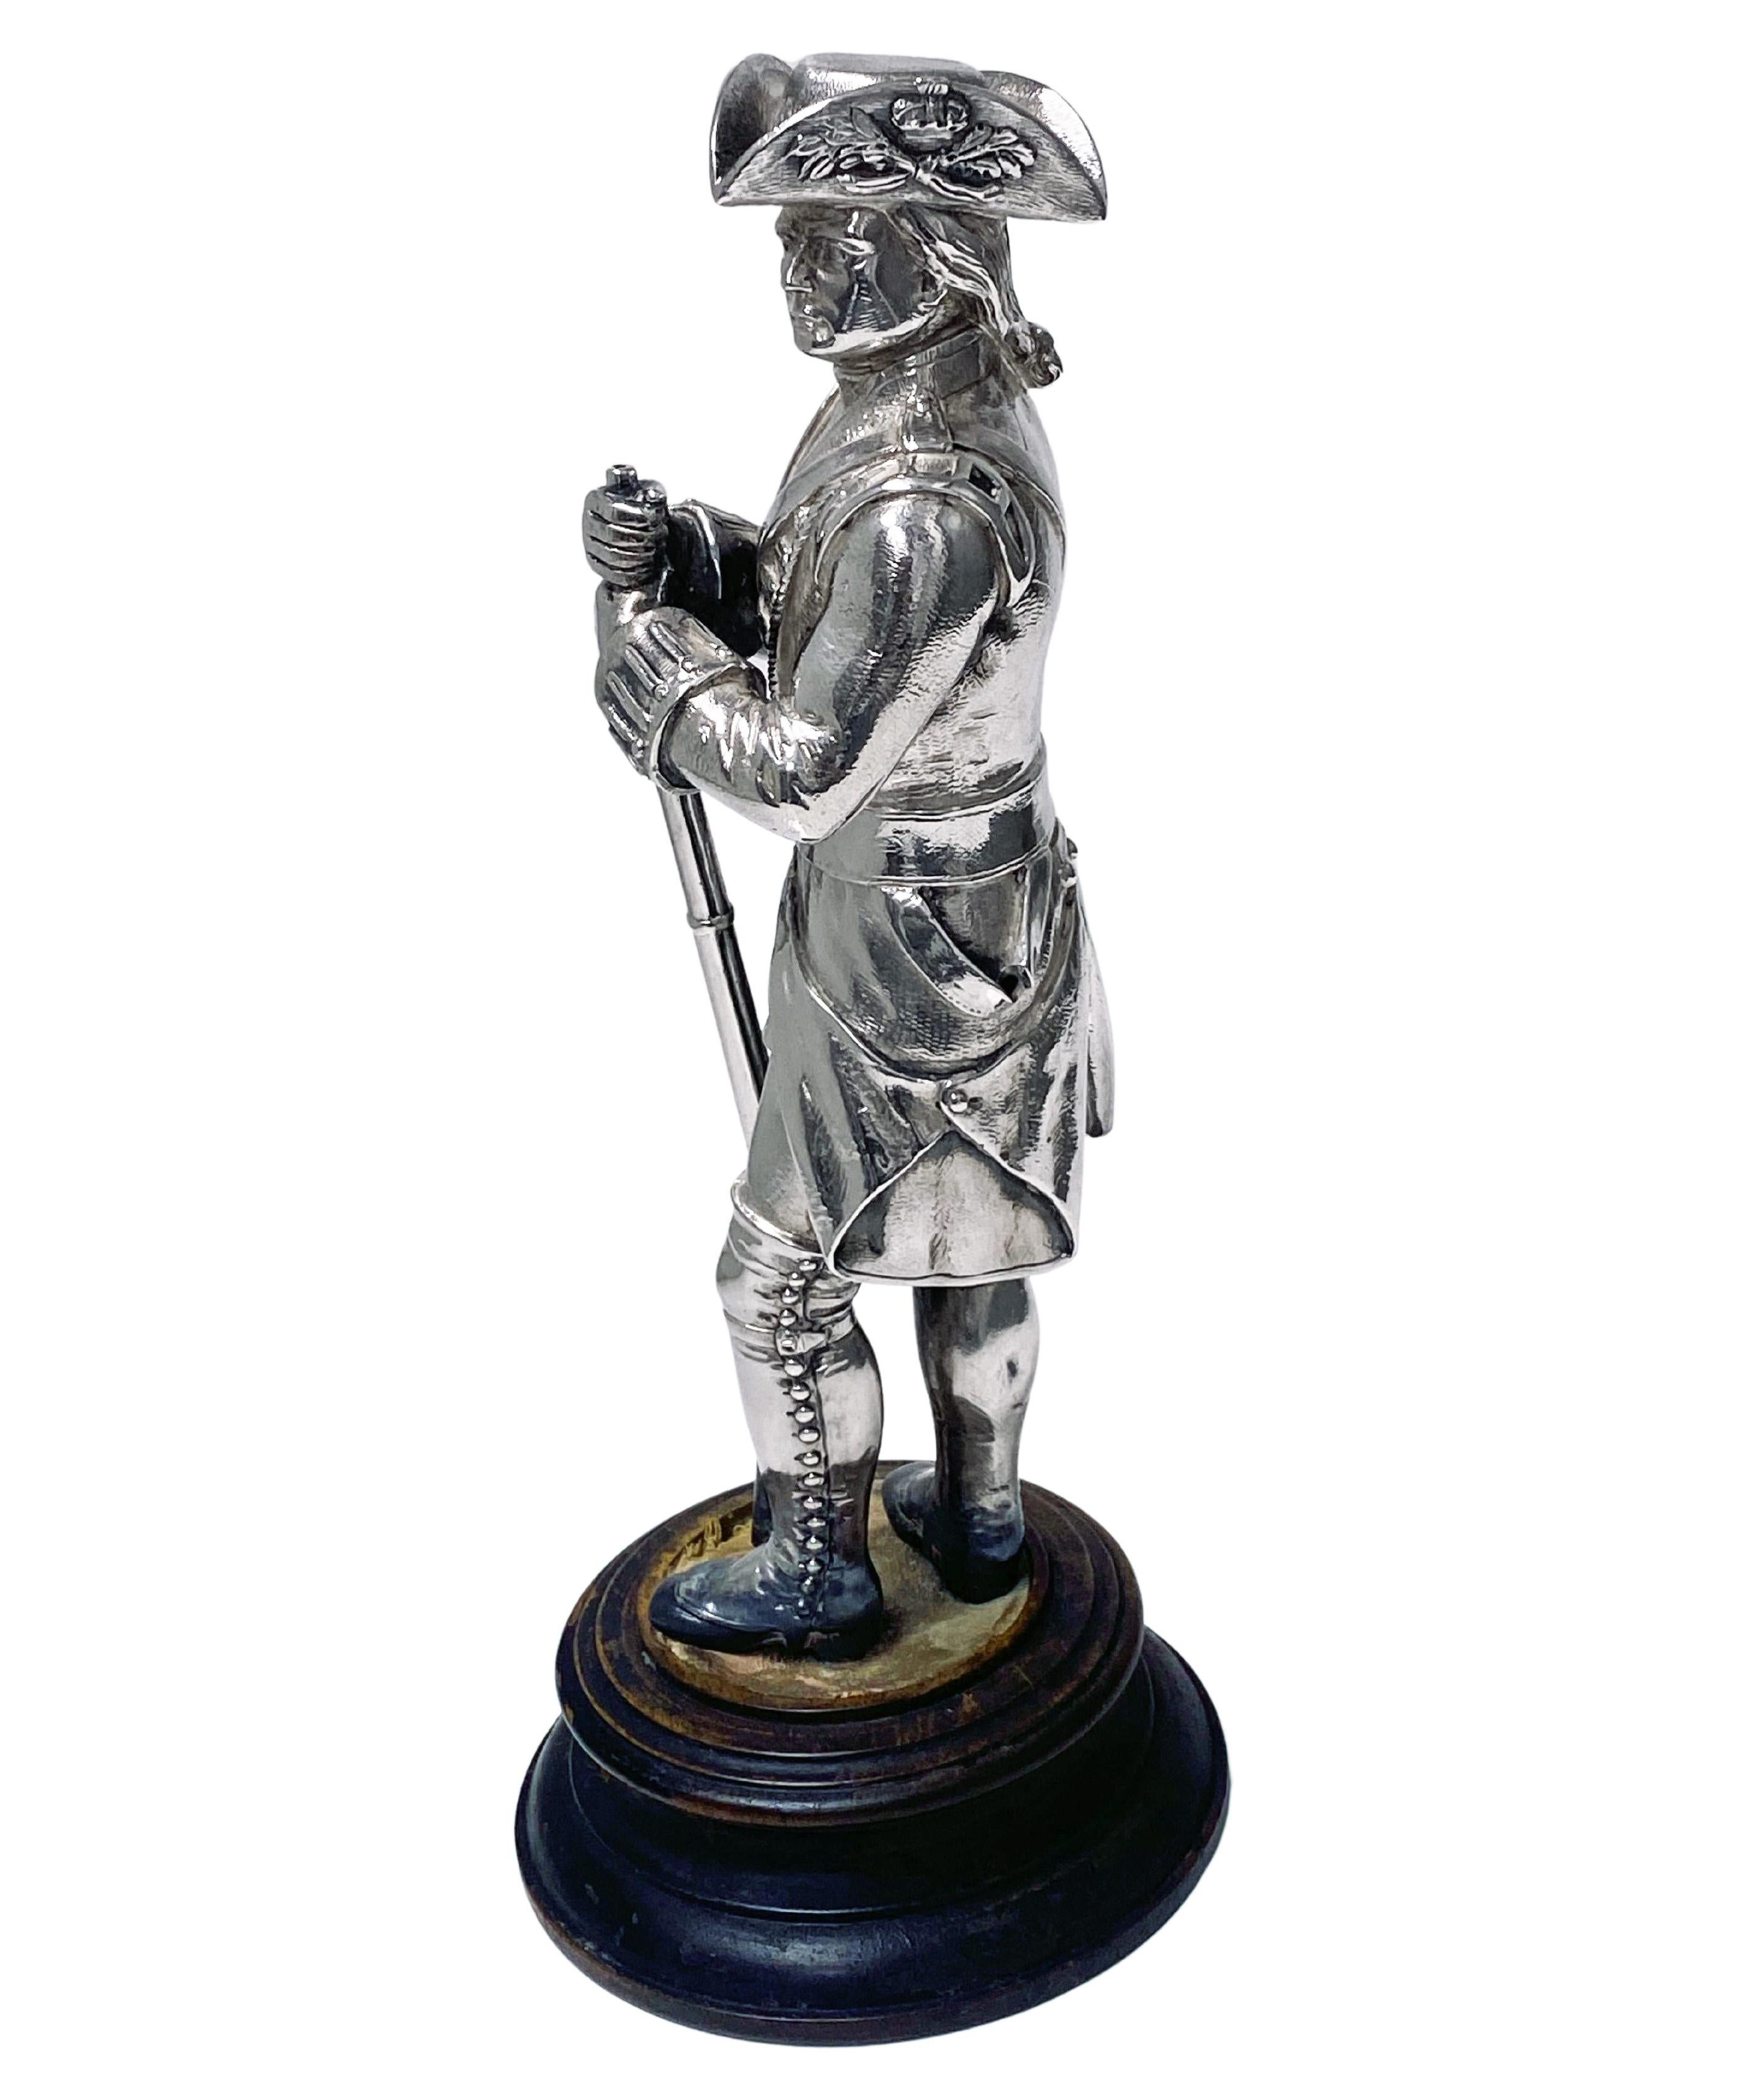 19th century sterling silver military figure, London 1882 George Angell.  Realistically modelled in the form of a soldier holding rifle, possibly Admiral Nelson. Holding a baker type rifle and uniform embellished with fine details of a soldier's